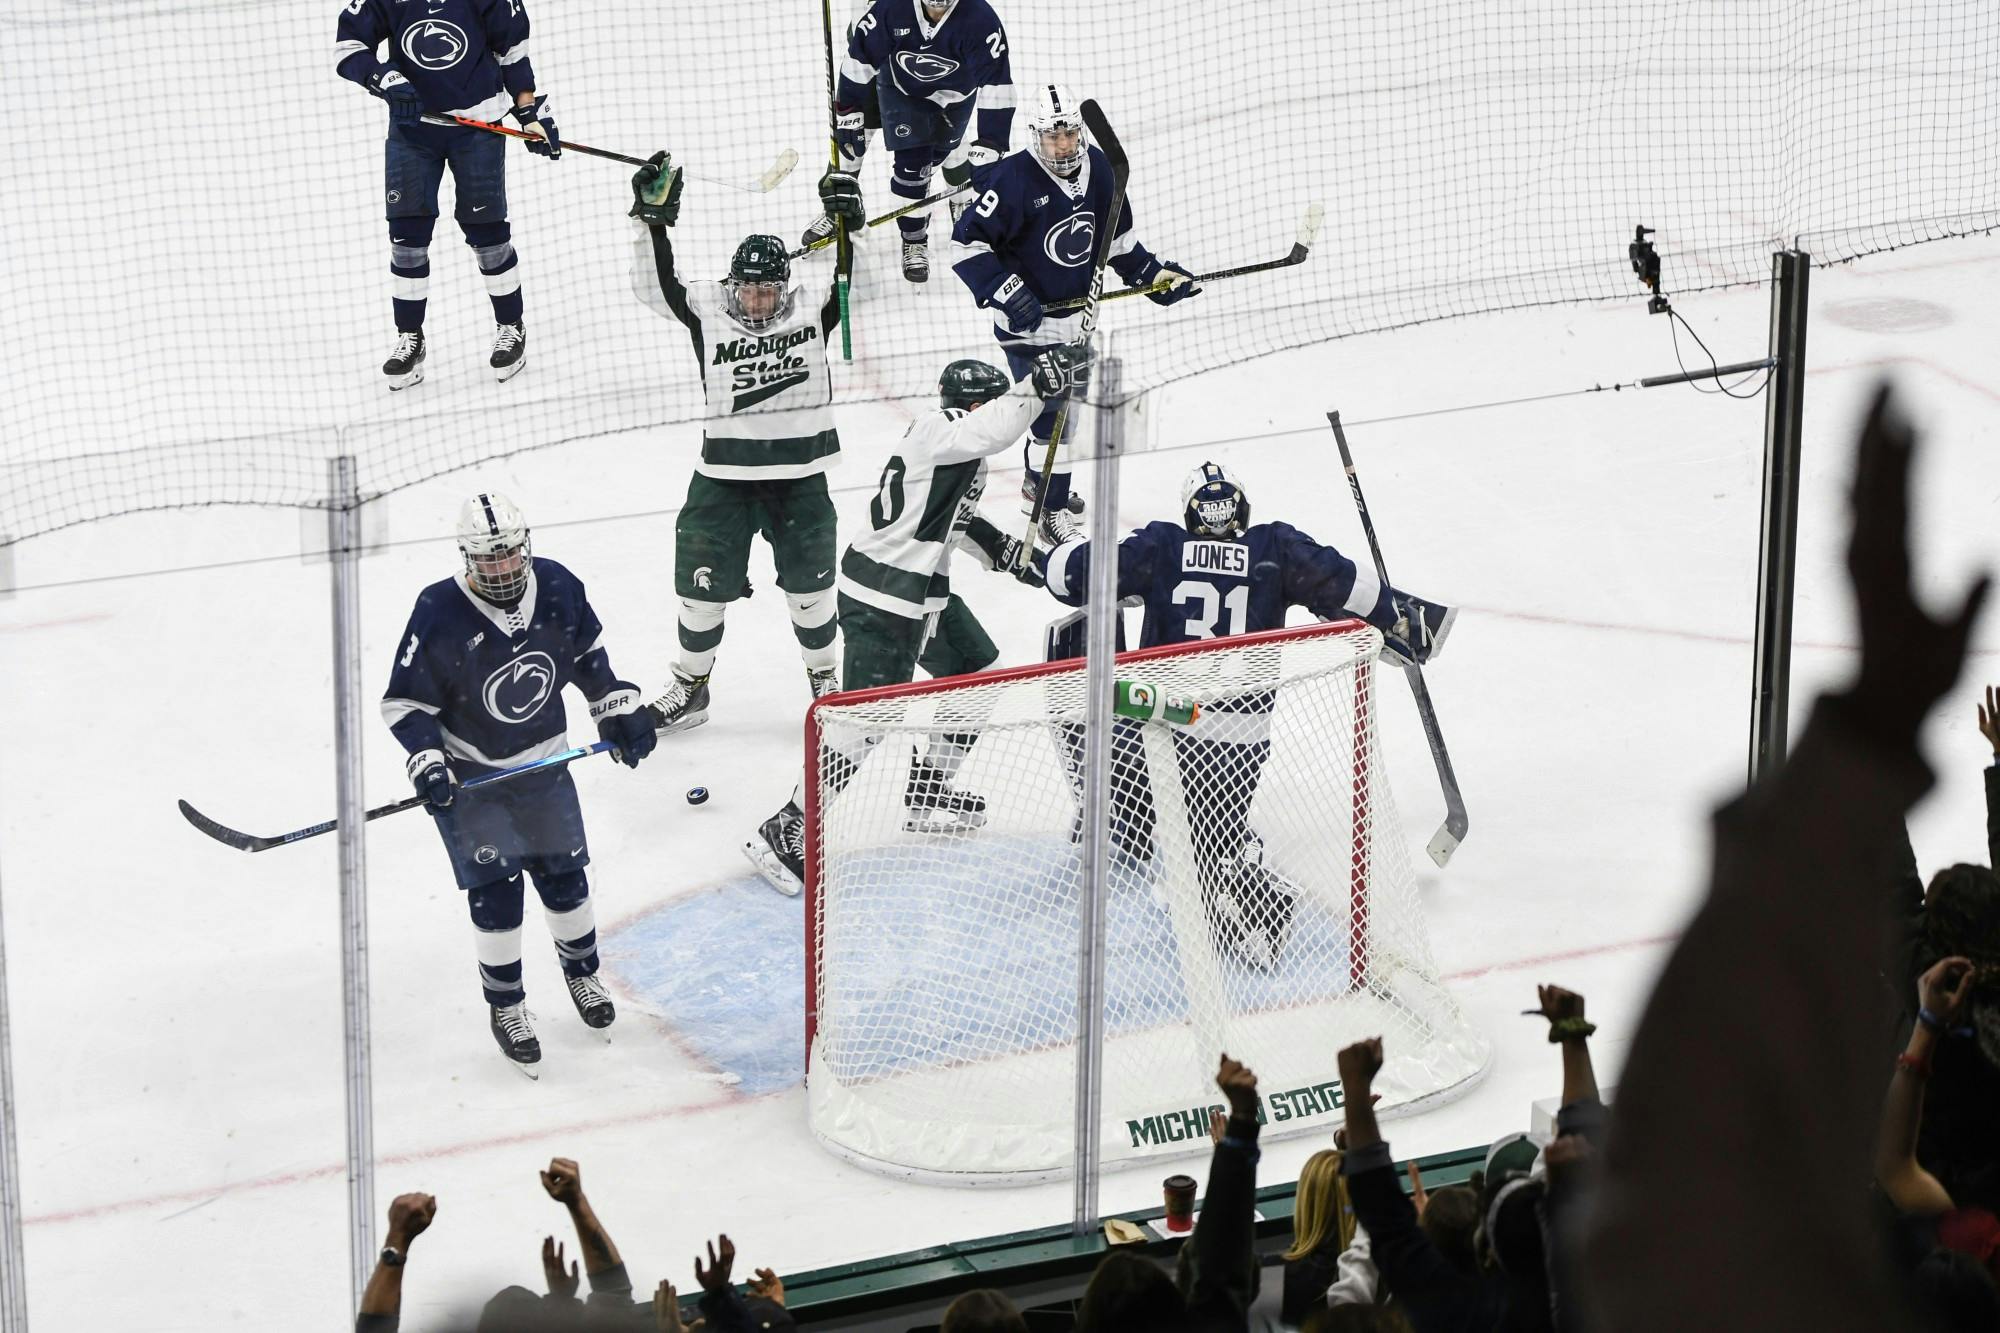 <p>Spartan athletes and fans celebrate a goal during a hockey game against Penn State on Jan. 24, 2020, at Munn Ice Arena. The Spartans defeated the Nittany Lions, 4-2.</p>